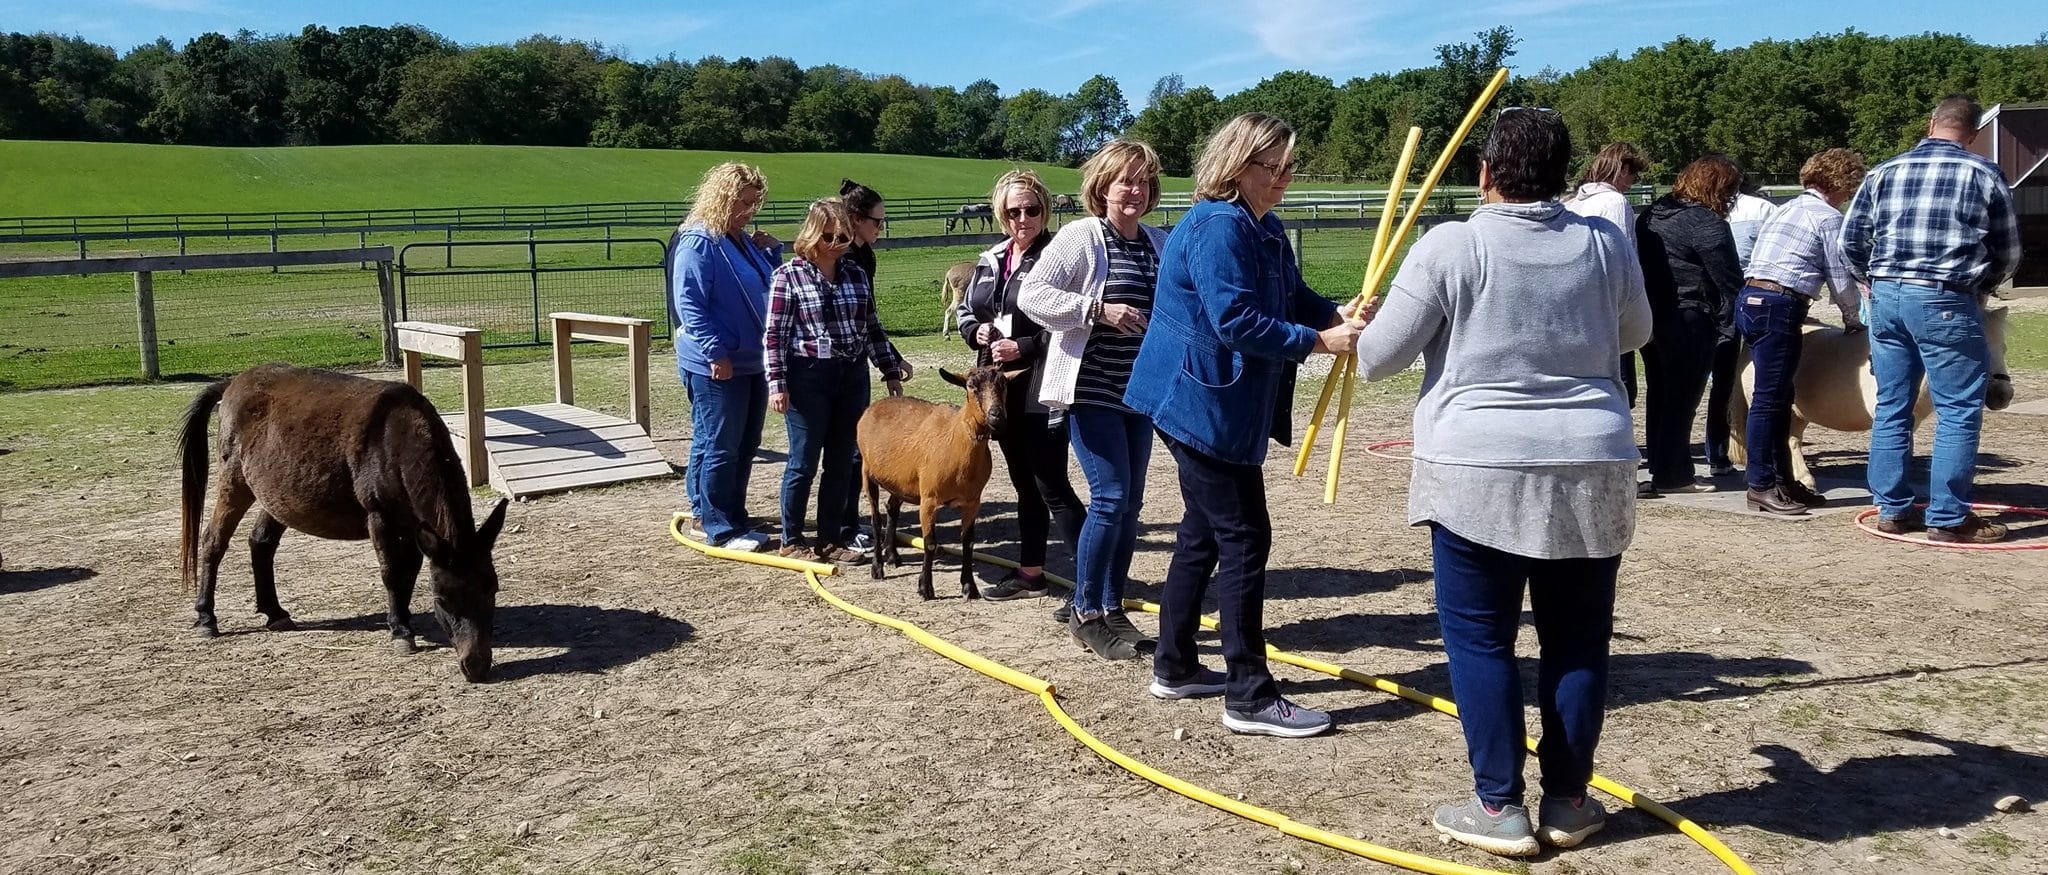 Harness the Power of your Team session with animals